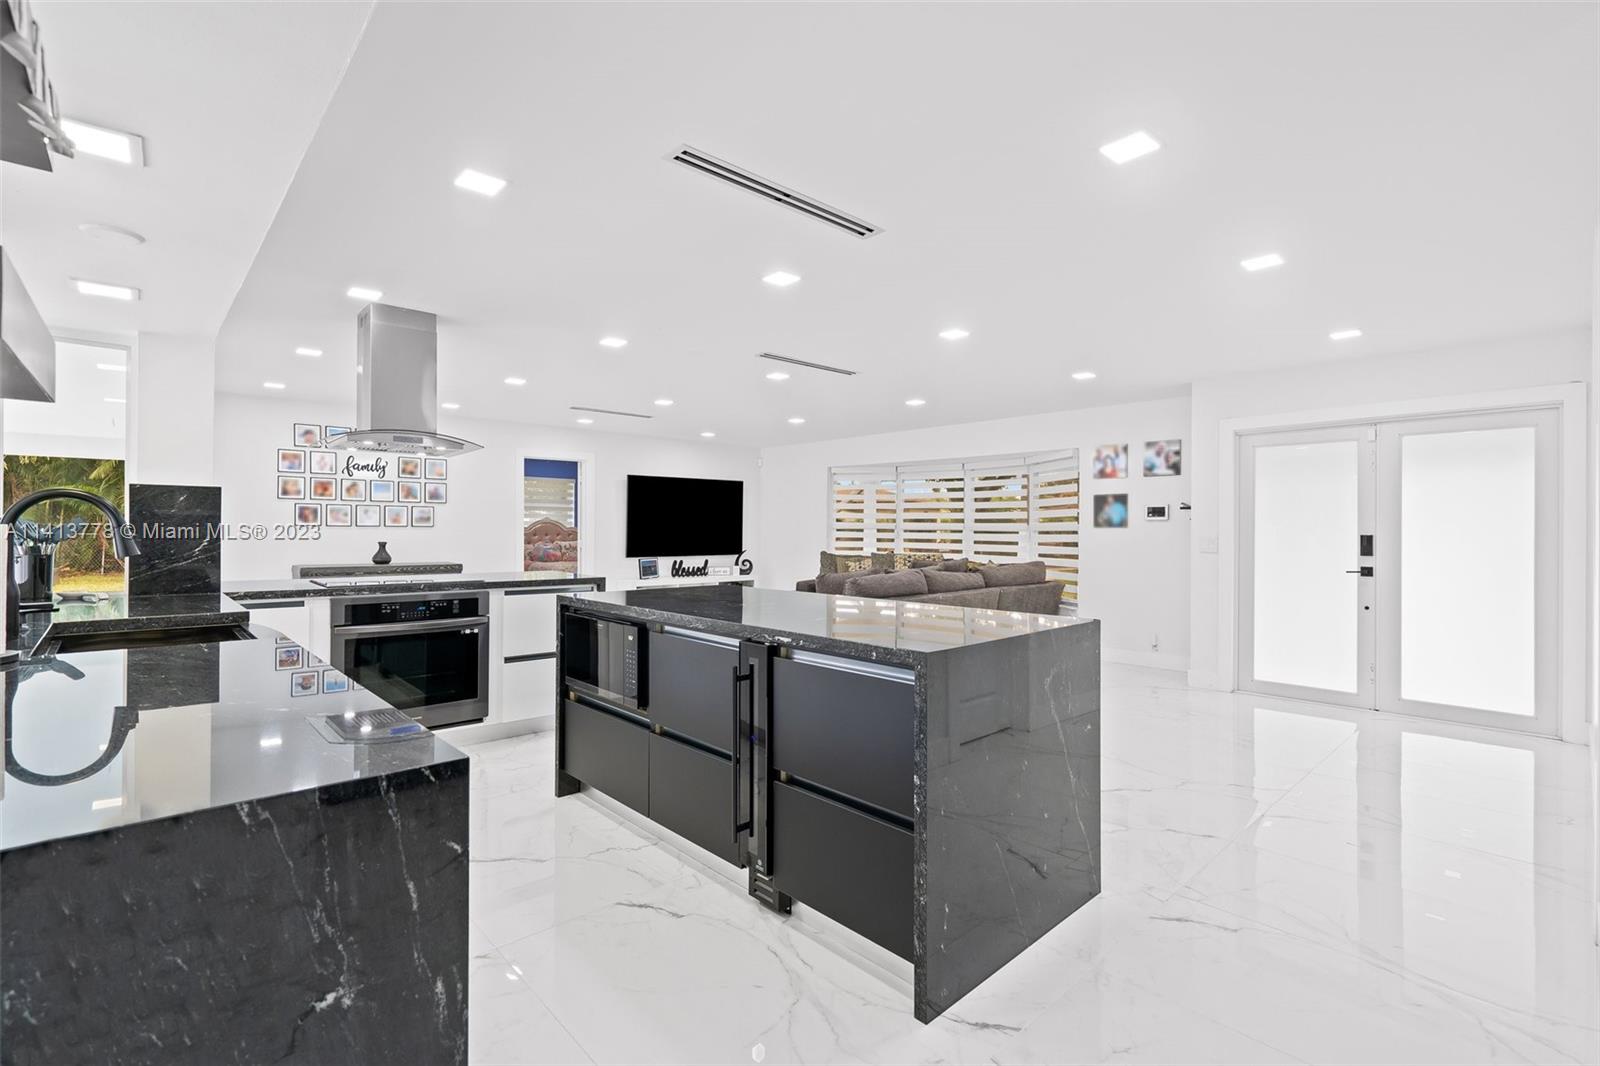 a kitchen with a sink stainless steel appliances furniture cabinets and a counter top space